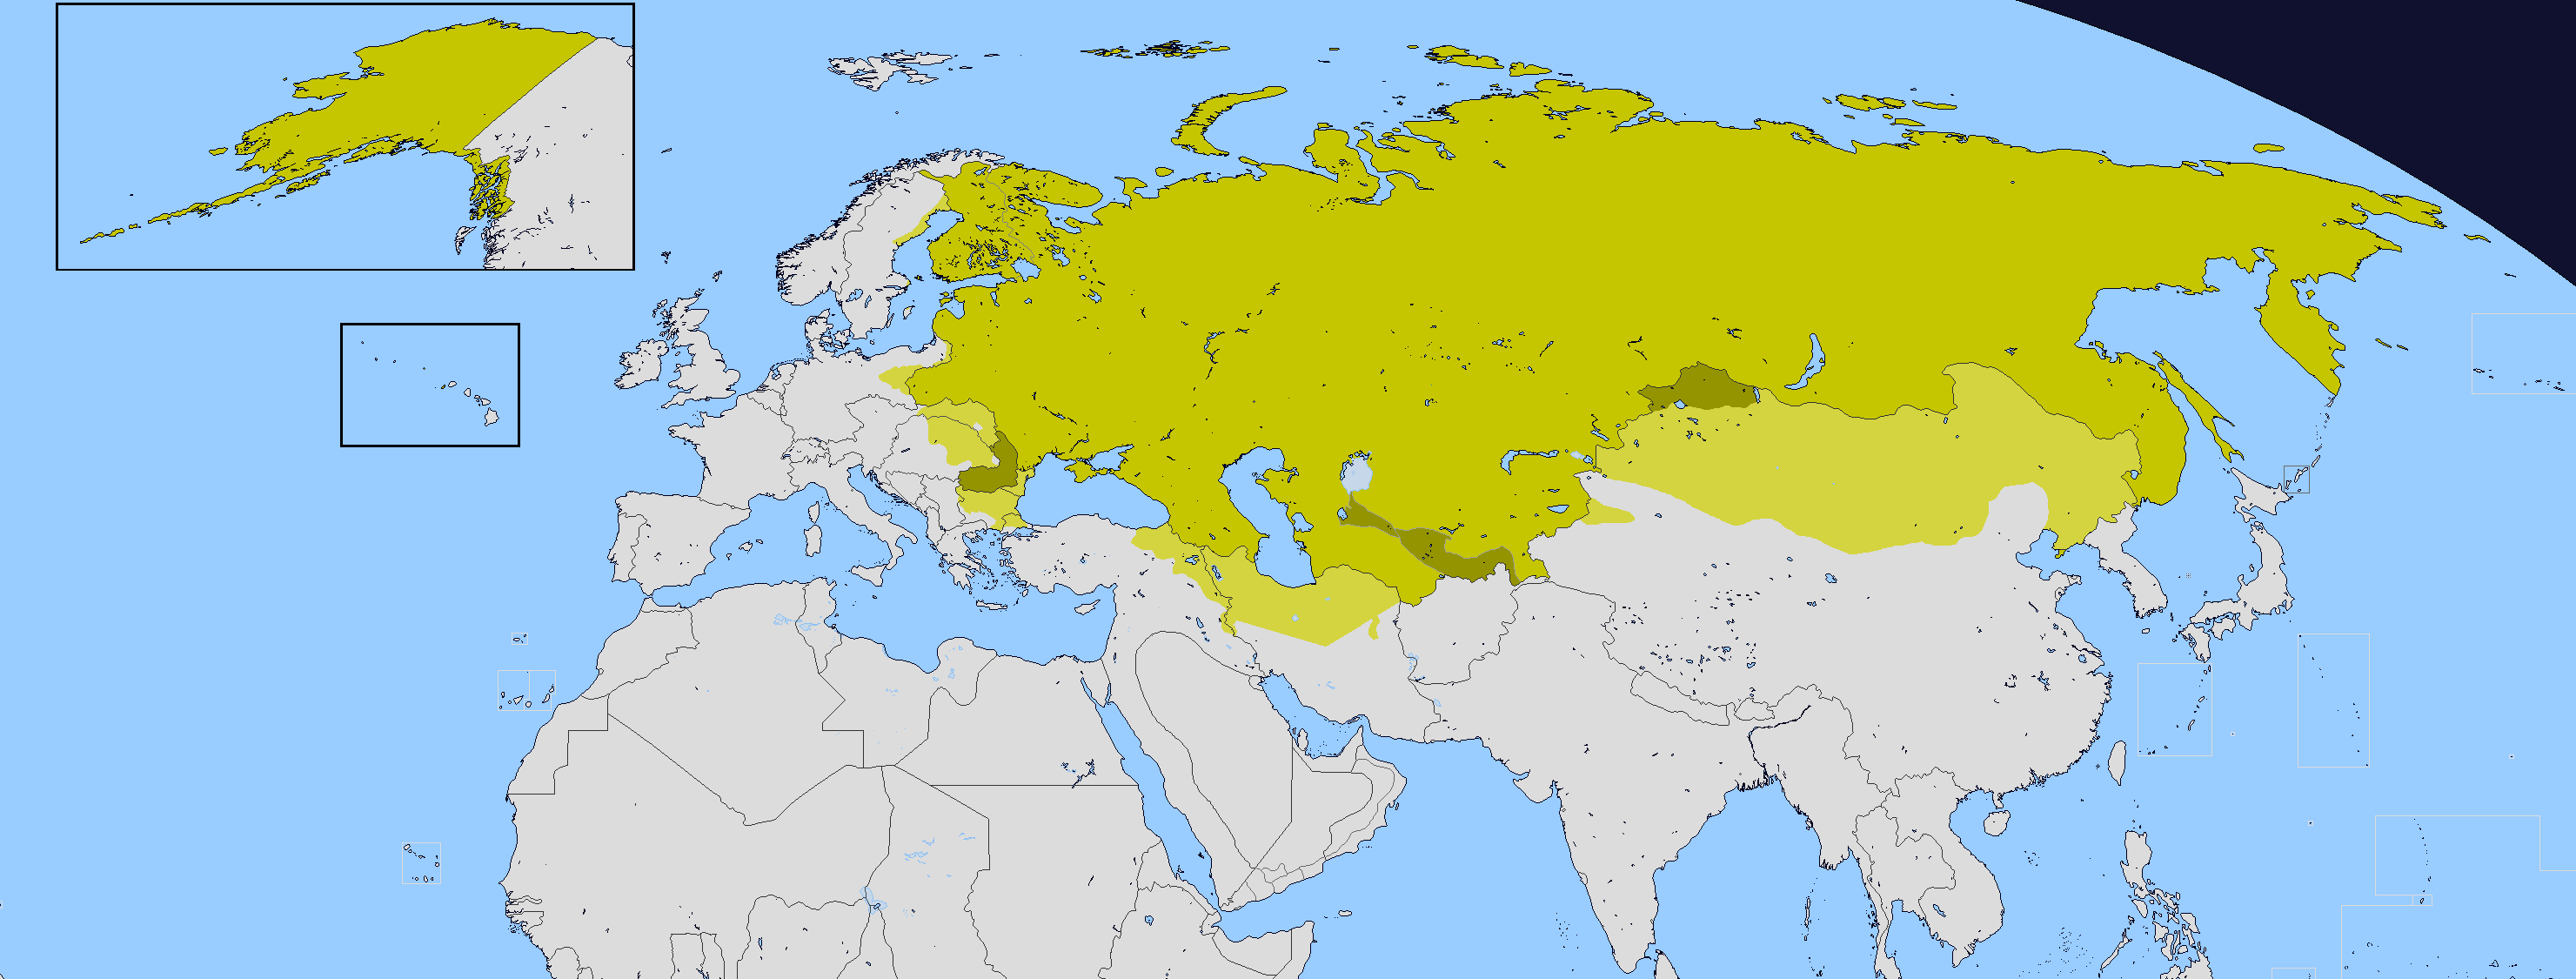 Maps Of The Russian Empire 24